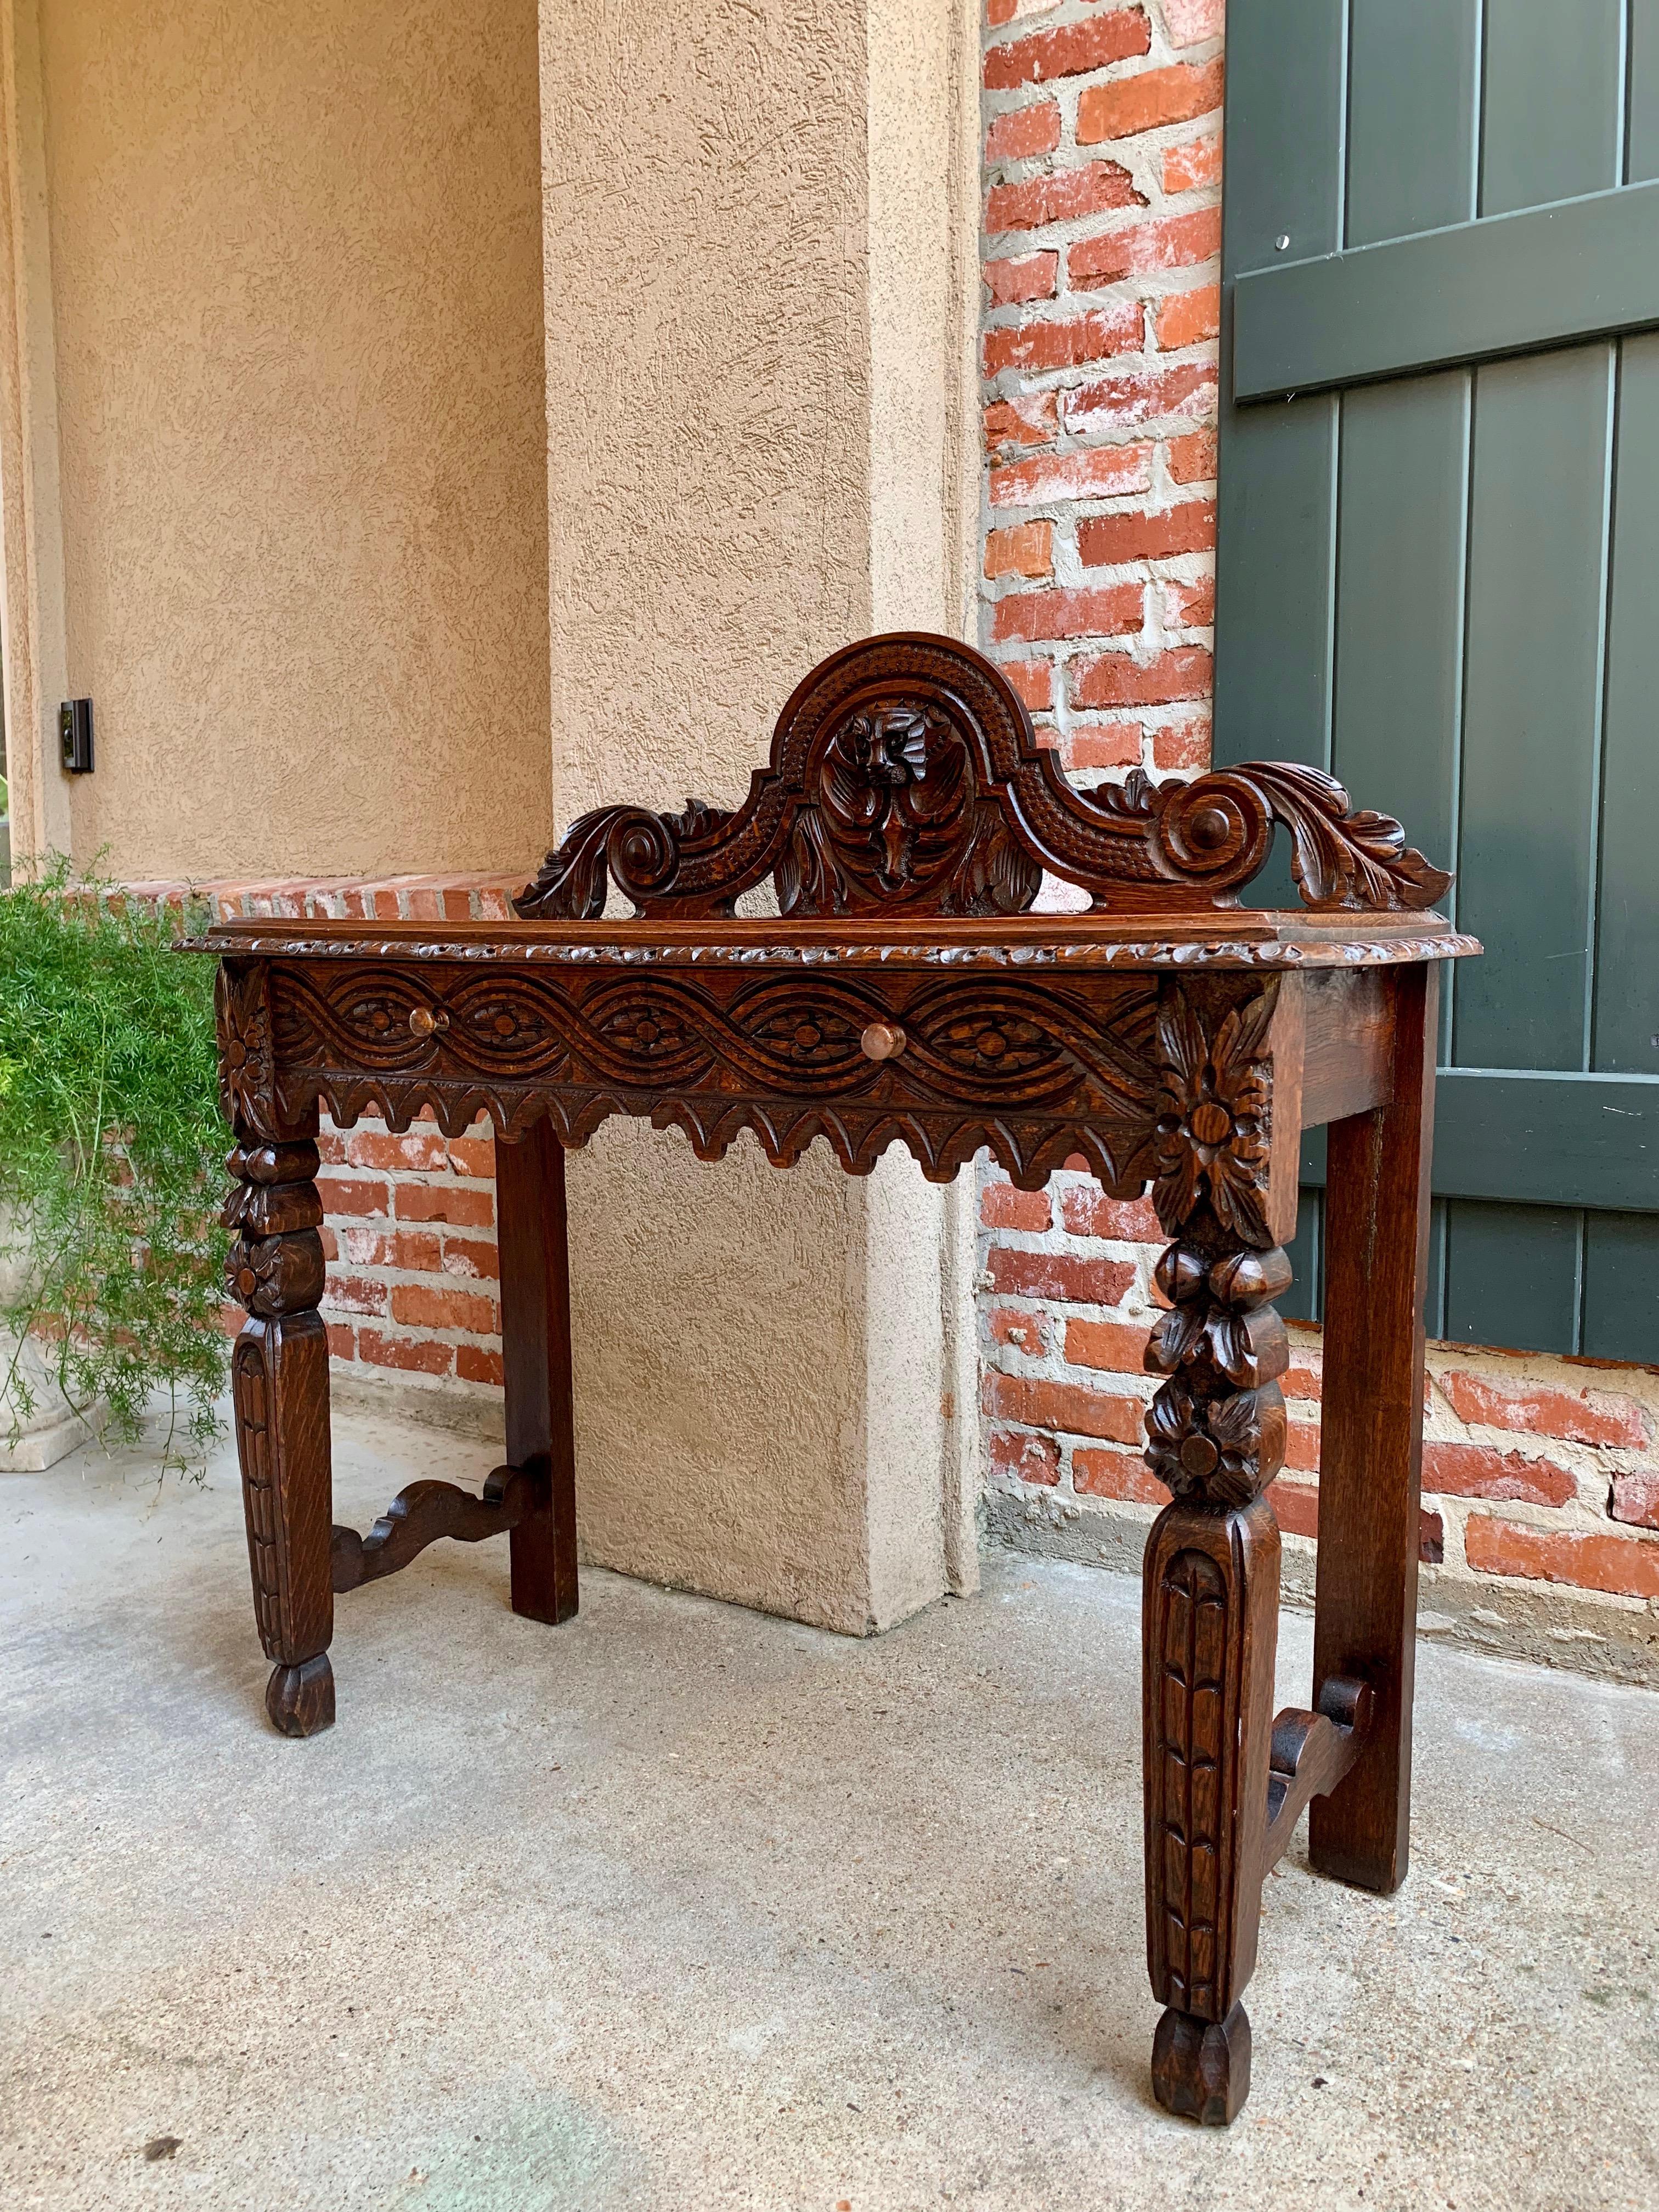 Direct from England, another wonderful antique English hall table or sideboard with gorgeous hand carvings throughout!
~ Large dimensional carved back crown piece with center medallion flanked by large scrolls on either side
~ Wide front apron